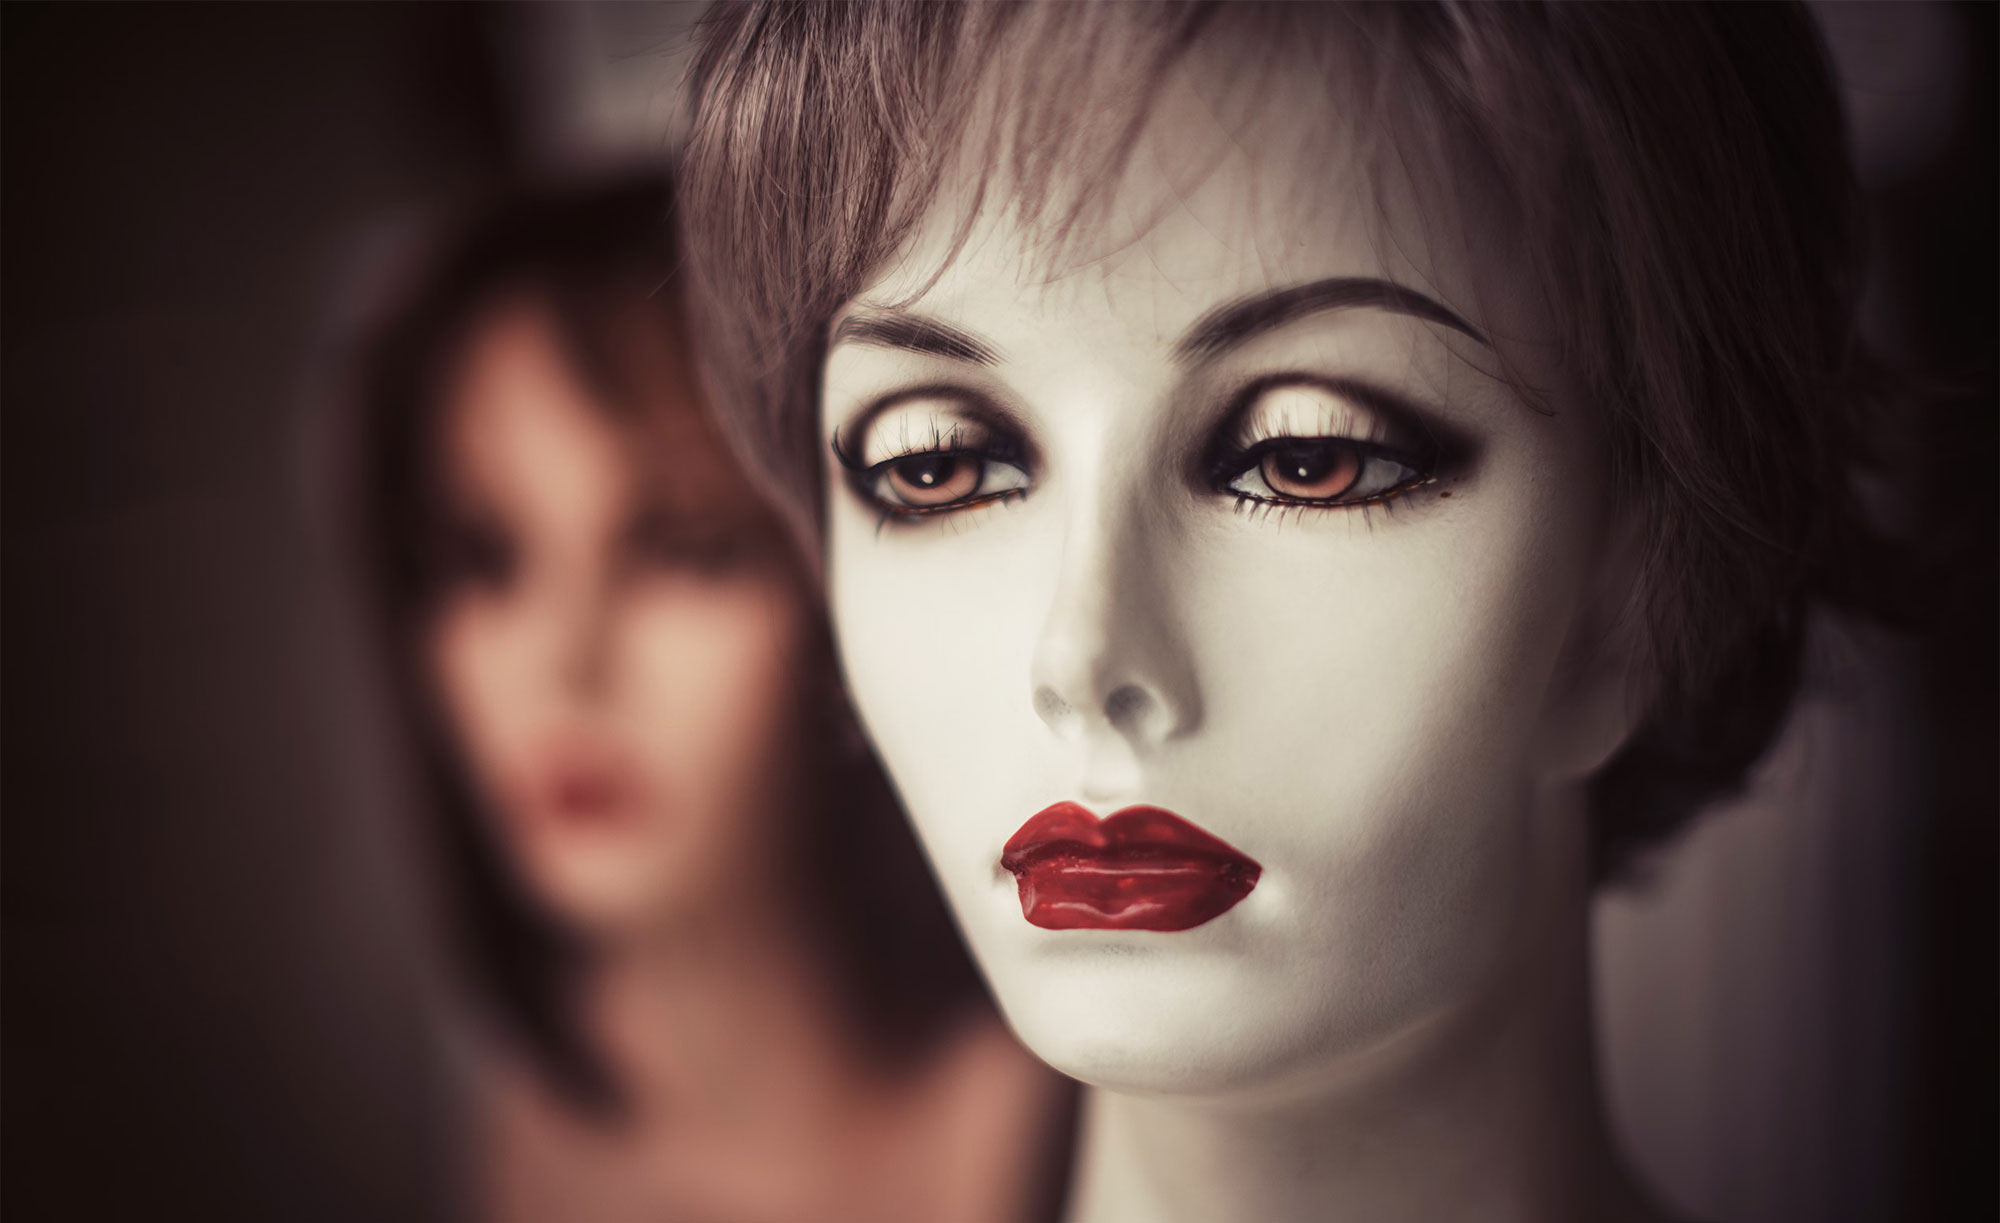 Image of mannequin faces that demonstrate the uncanny valley effect.